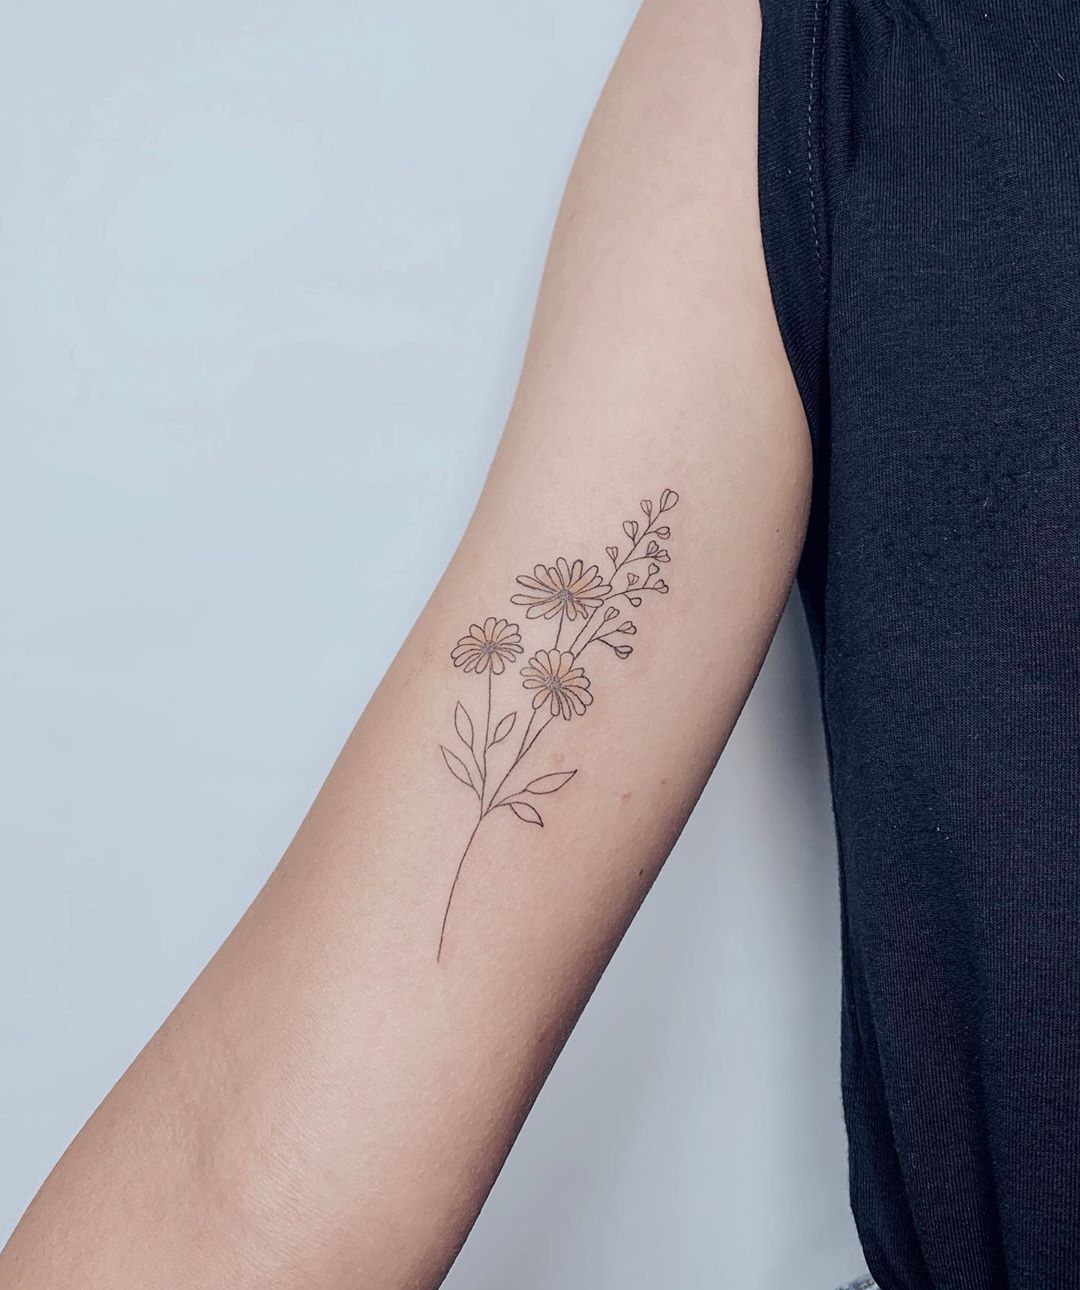 Best Small Flower Tattoo Designs To Try | Cosmo.ph